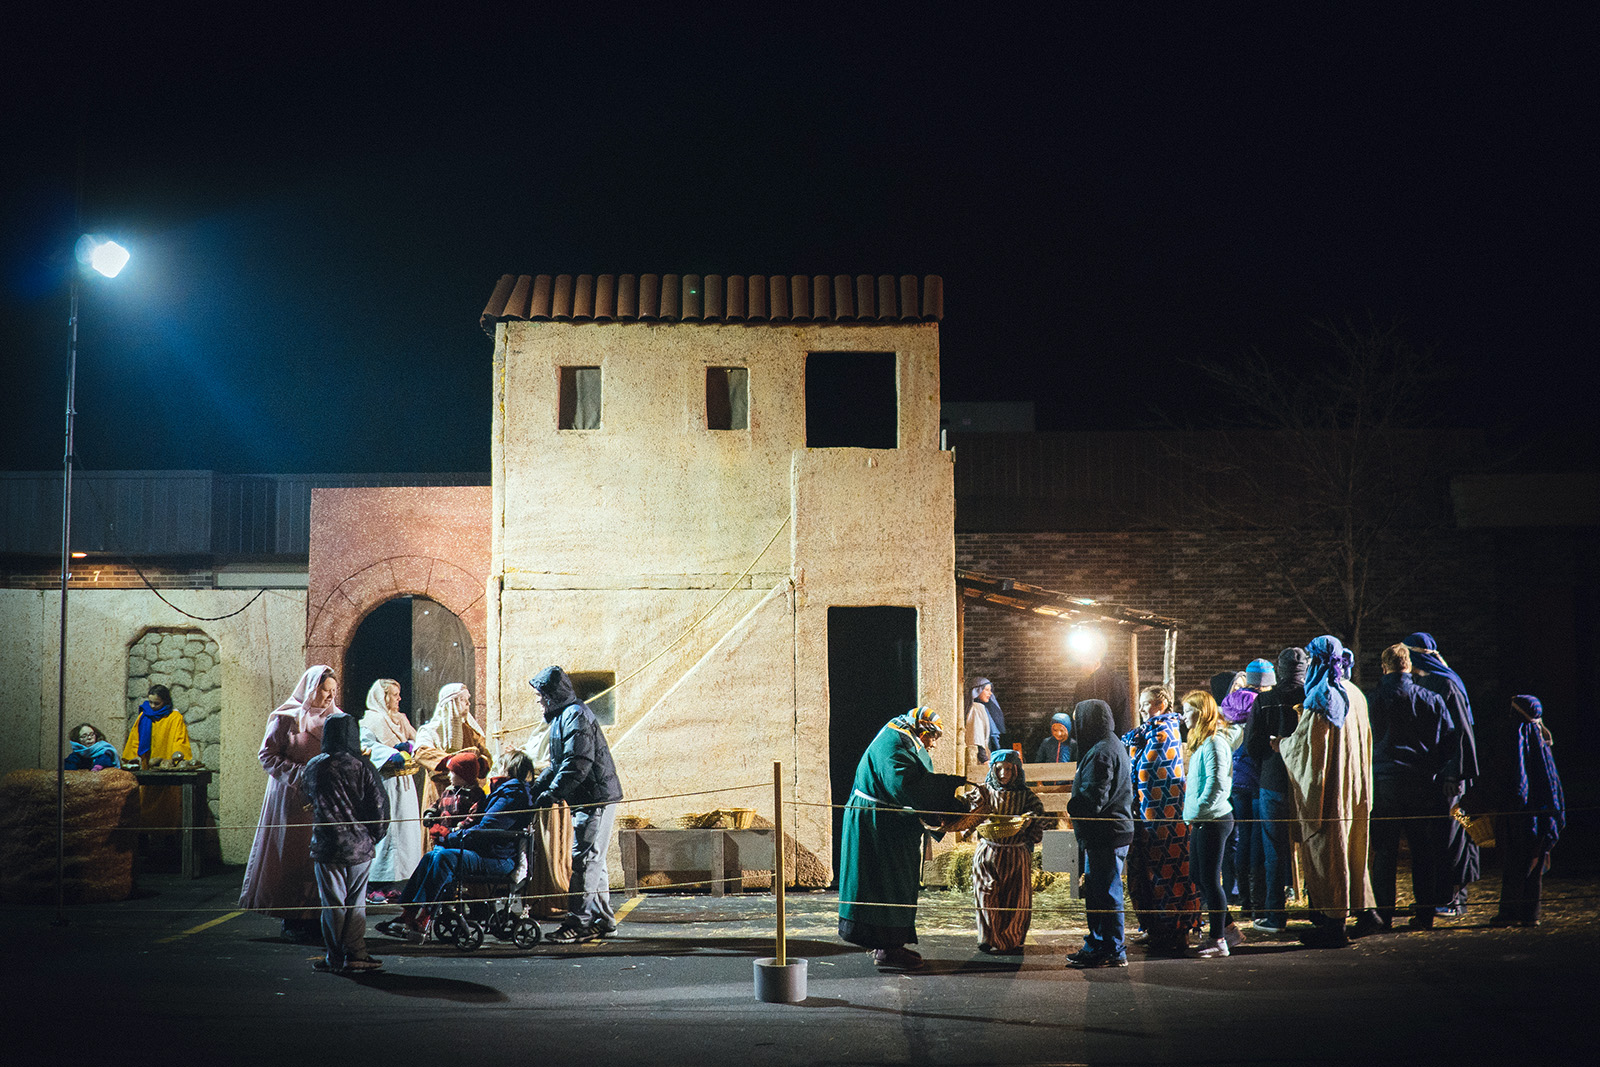 Walk-through guests interact with the cast at the Bethlehem market during the 2015 Lafayette Living Nativity, which is hosted by Faith Church of Lafayette, Indiana. Photo courtesy of Faith Ministries